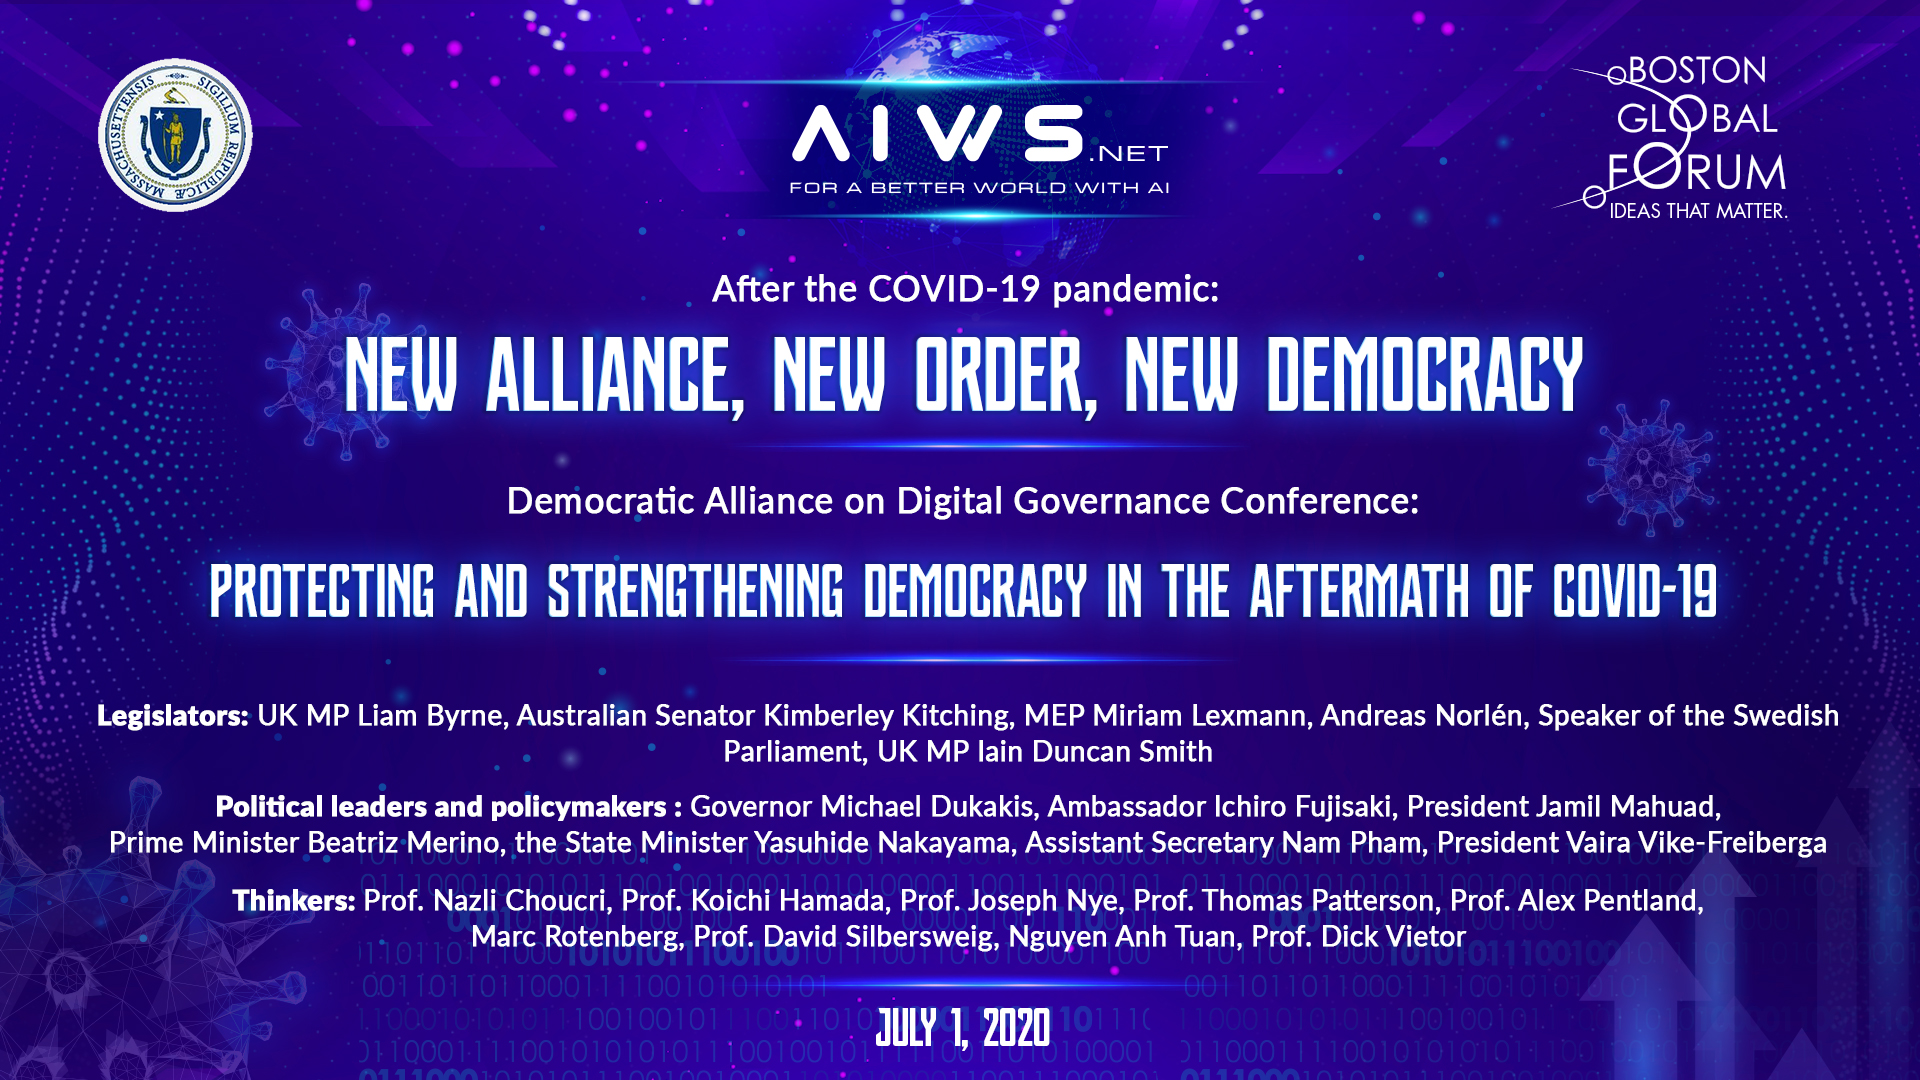 Democratic Alliance on Digital Governance Conference – Protecting and Strengthening Democracy in the Aftermath of COVID-19